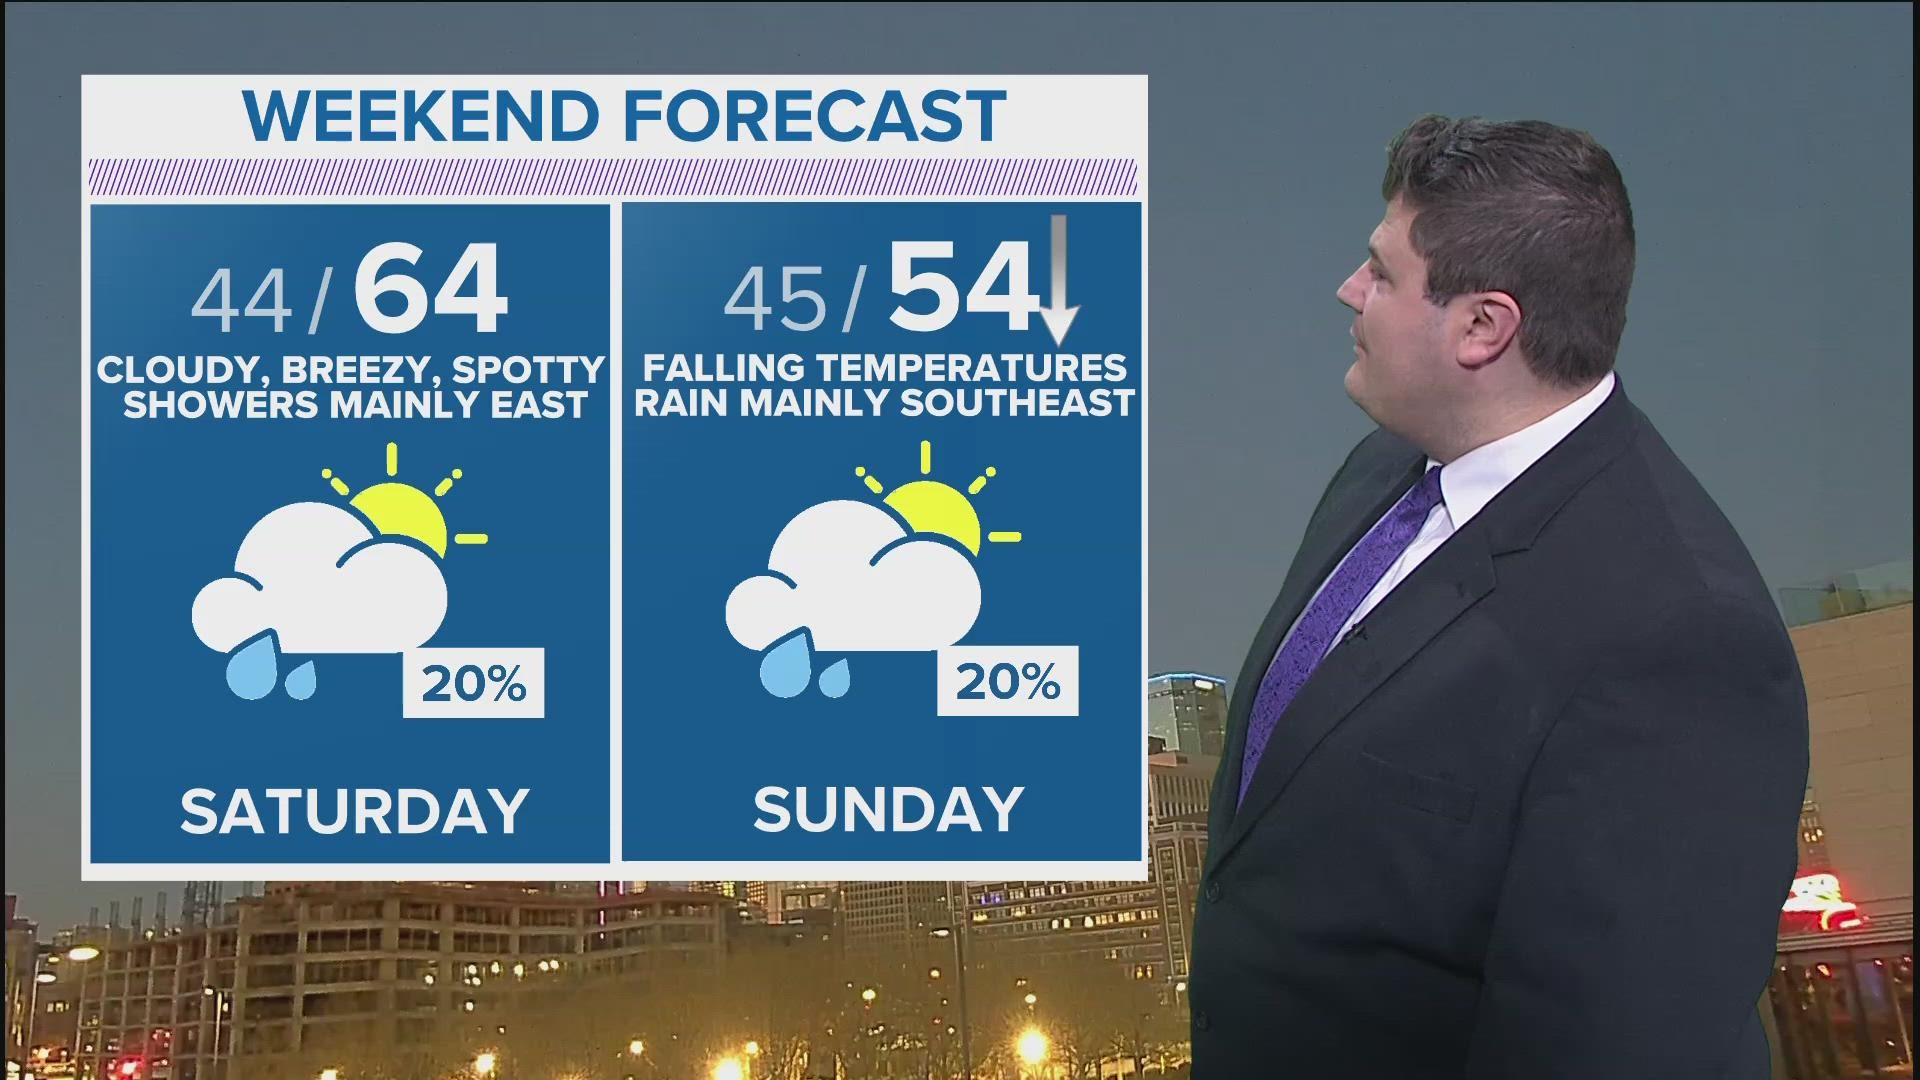 Expect temps in the low to mid-60s this weekend ahead of a cold front, bringing rain.